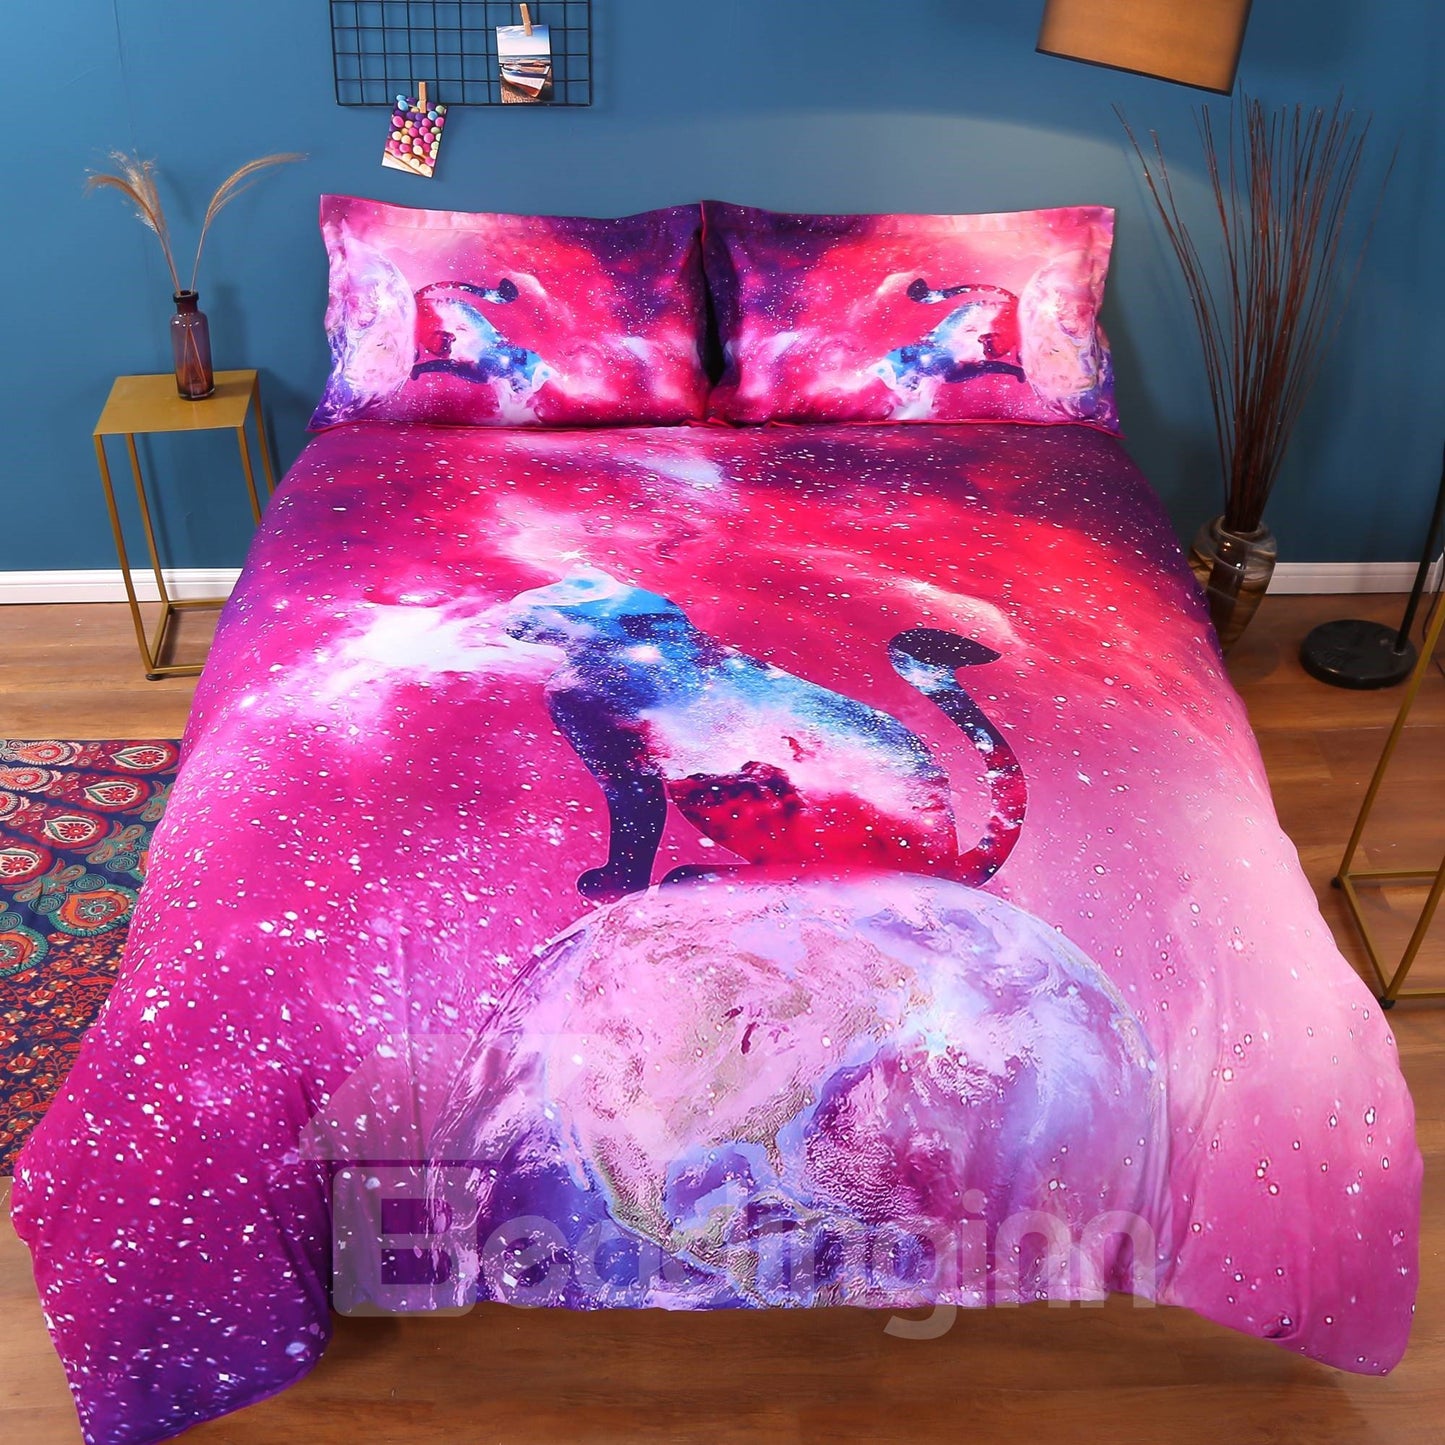 3D Red Galaxy Cat Printed 4-Piece Bedding Sets/Duvet Cover Set Queen King Size (Queen)